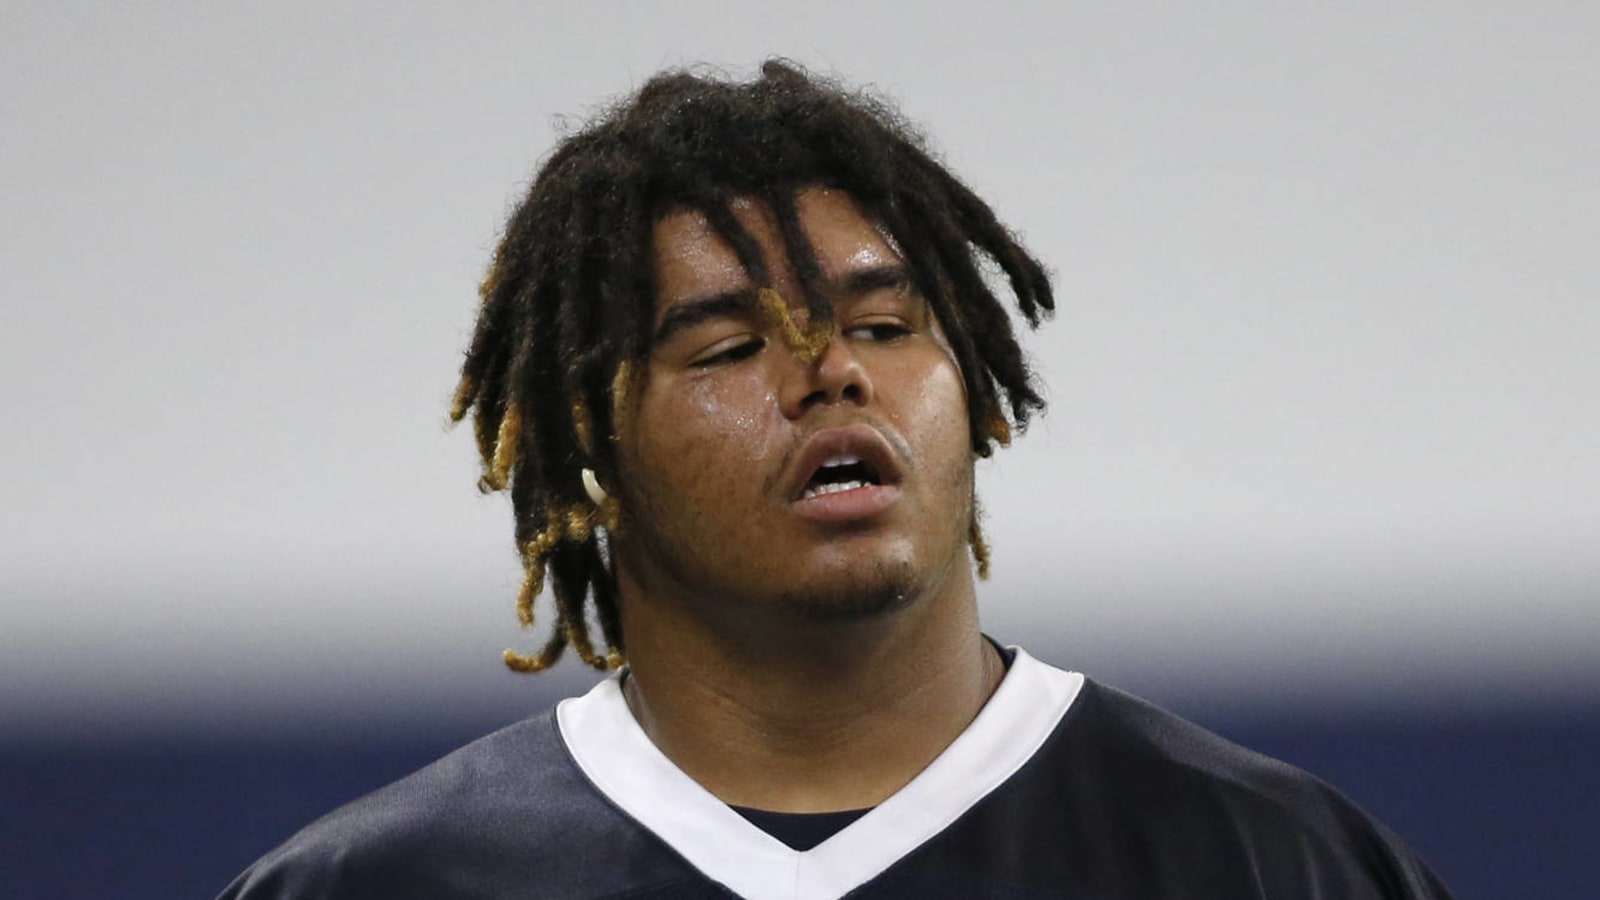 Cowboys’ Trysten Hill suspended for throwing punch after Raiders game